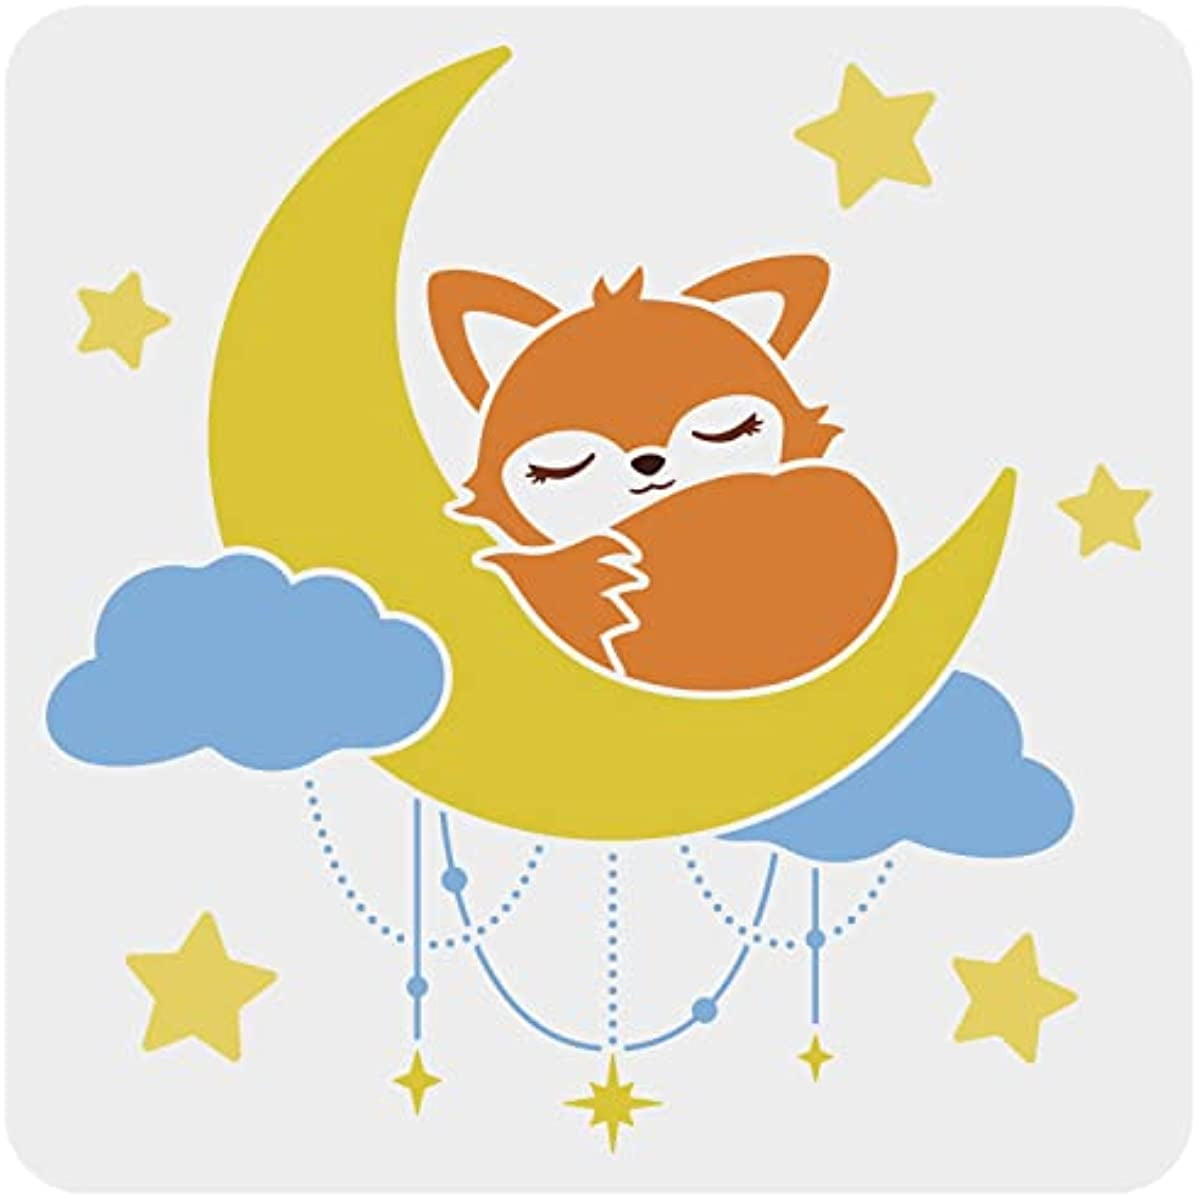 Moon Fox Stencil  inch Large Cute Animals Stencil Fox Sleeping On  The Moon Reusable Stars Clouds Pendants Craft Stencils for Painting on Wood  Wall Fabric Home Decor 